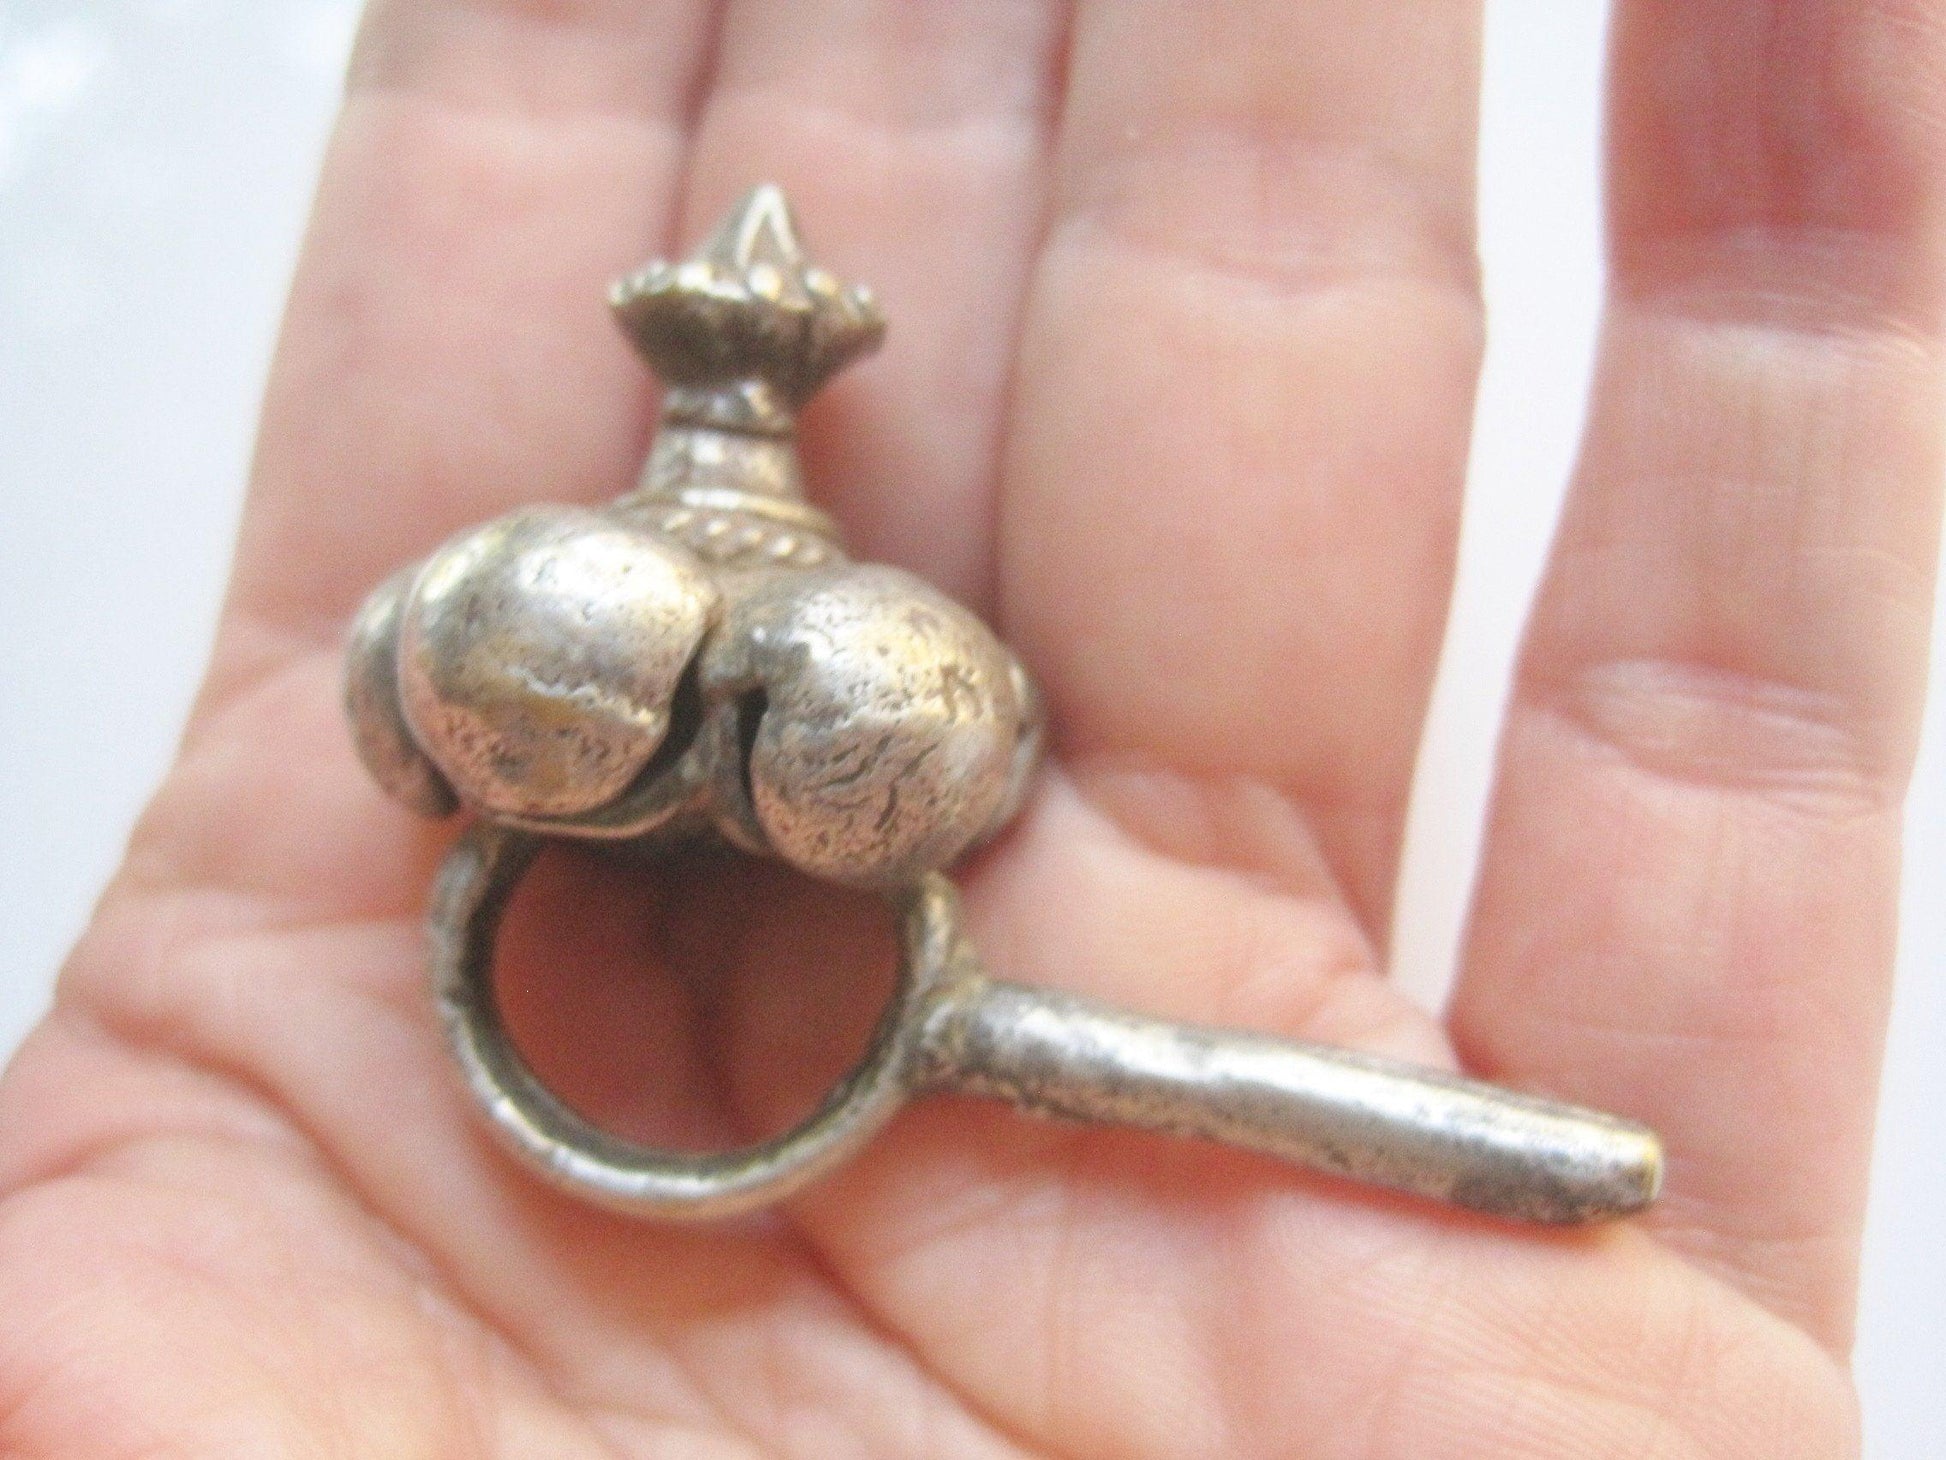 Antique Indian Ring for a Small Toe - Anteeka